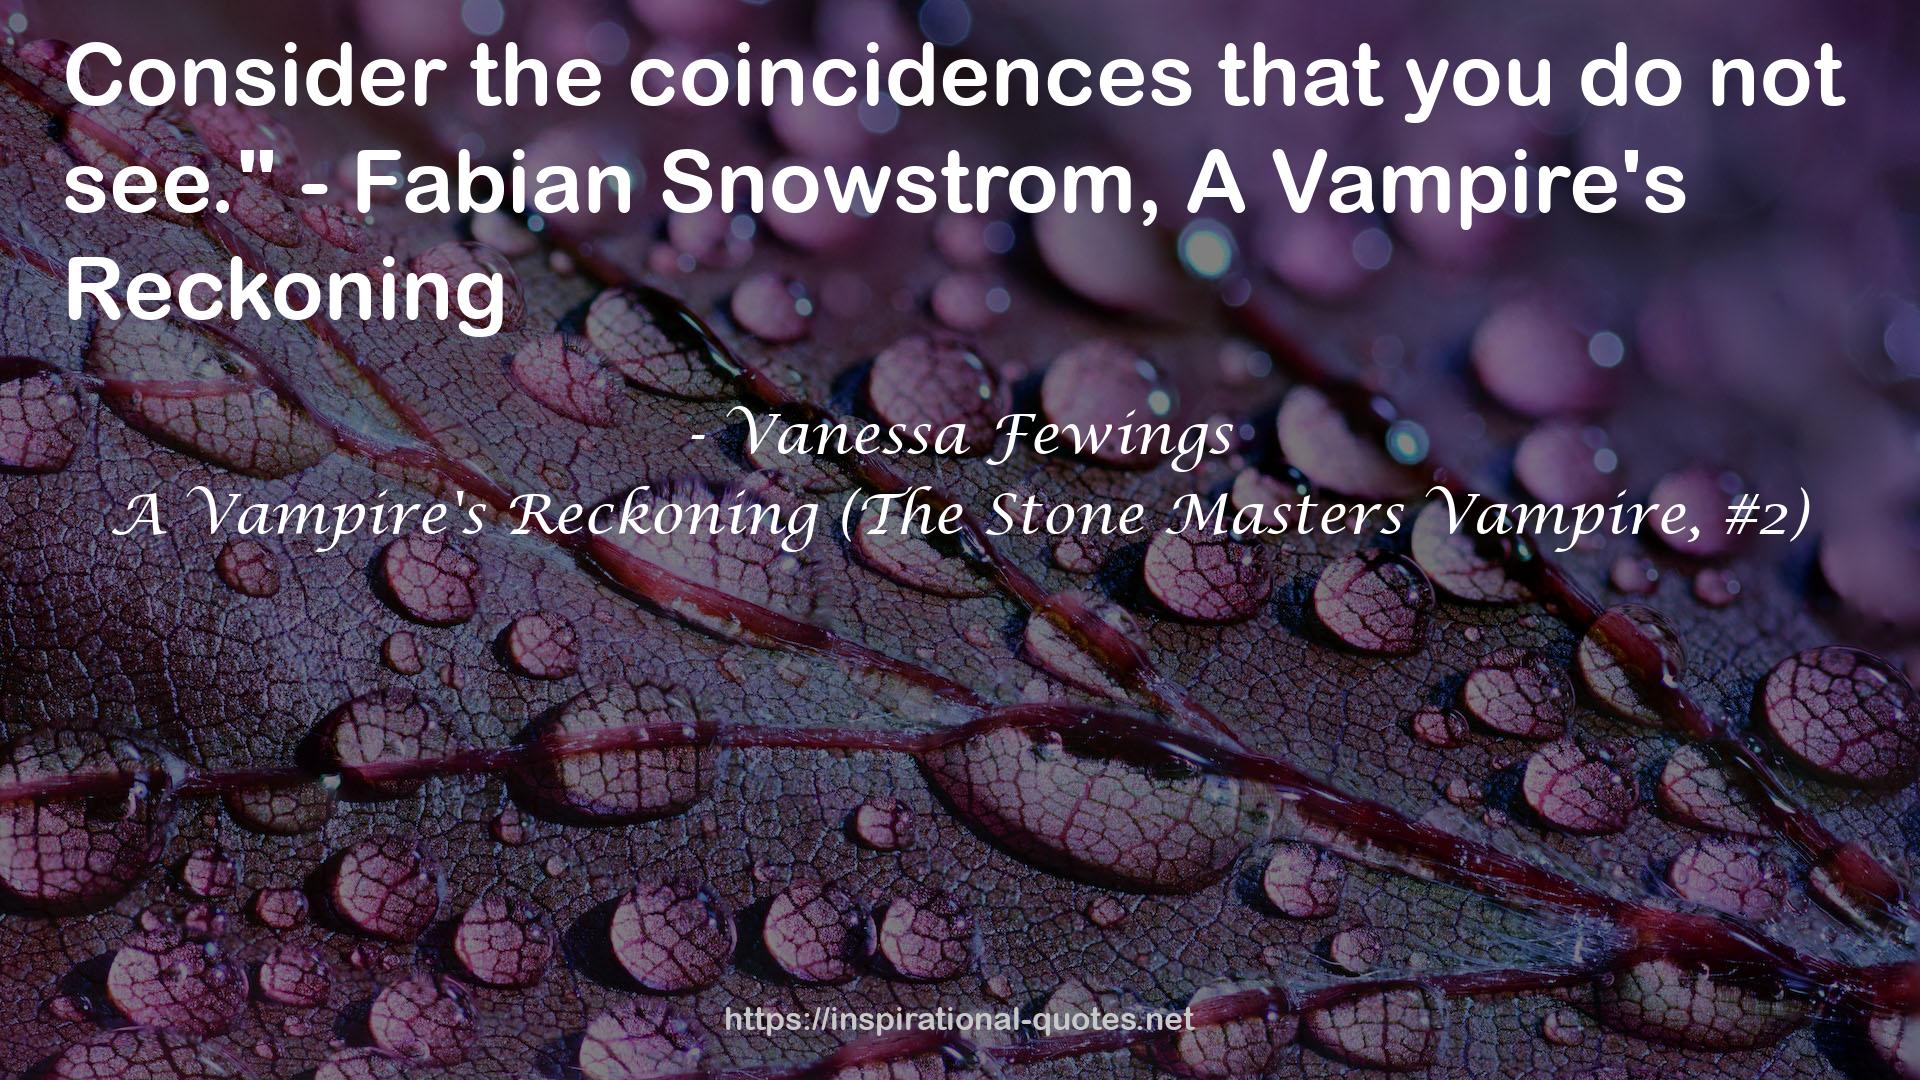 A Vampire's Reckoning (The Stone Masters Vampire, #2) QUOTES